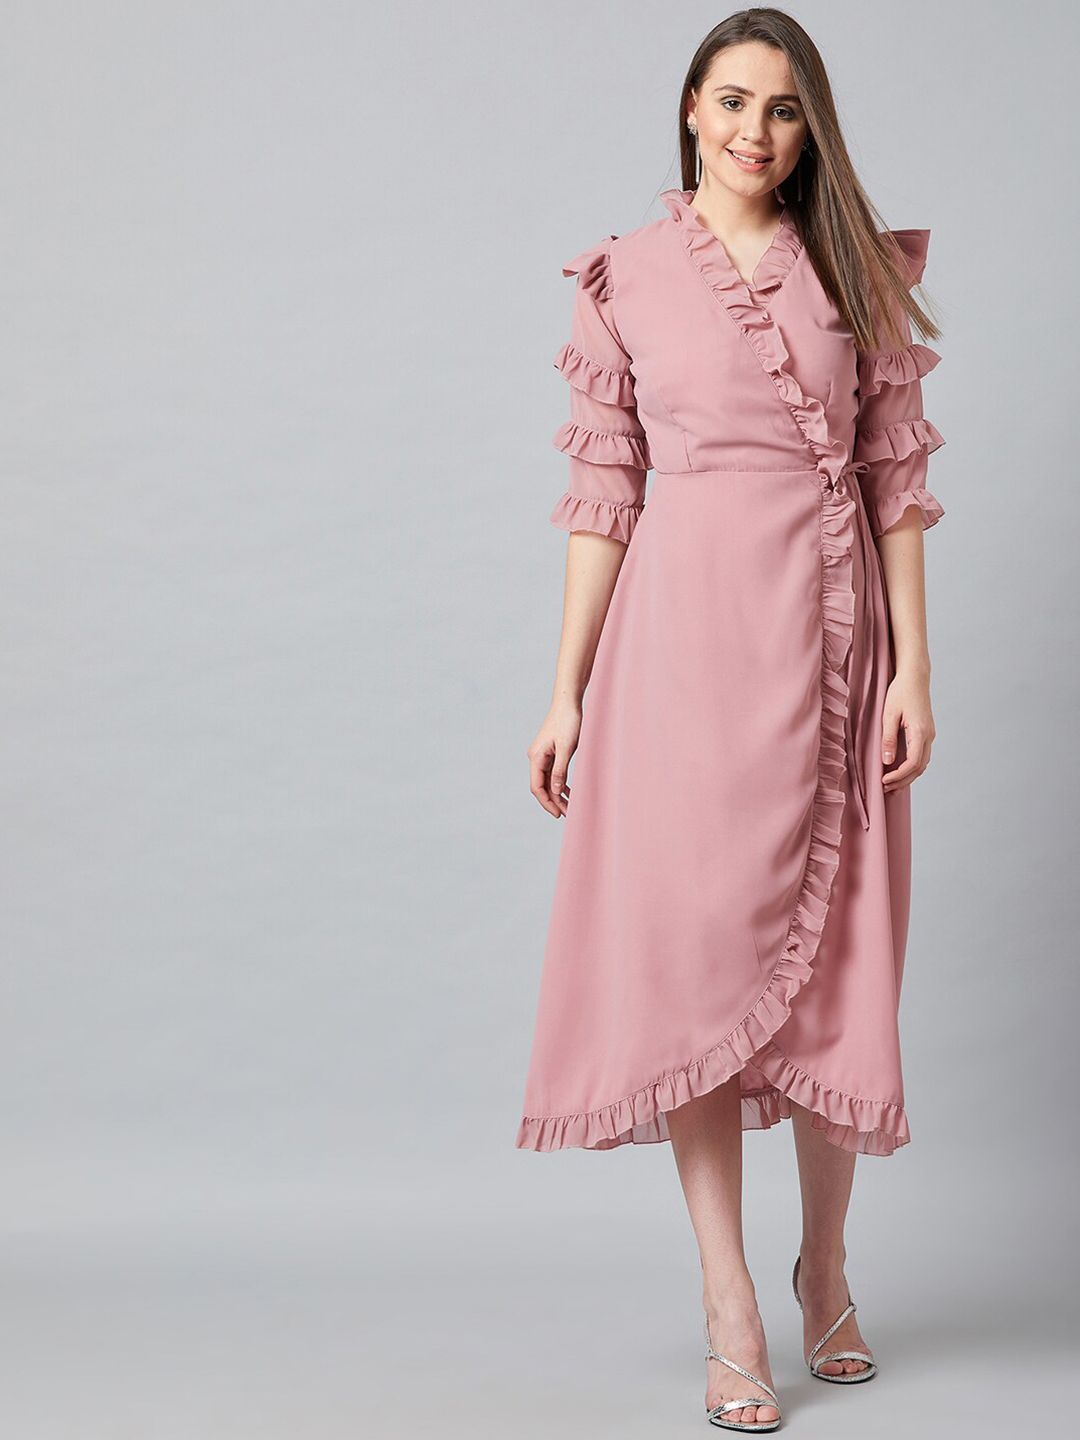 PANIT Pink Georgette Solid Midi Wrap Dress Price in India